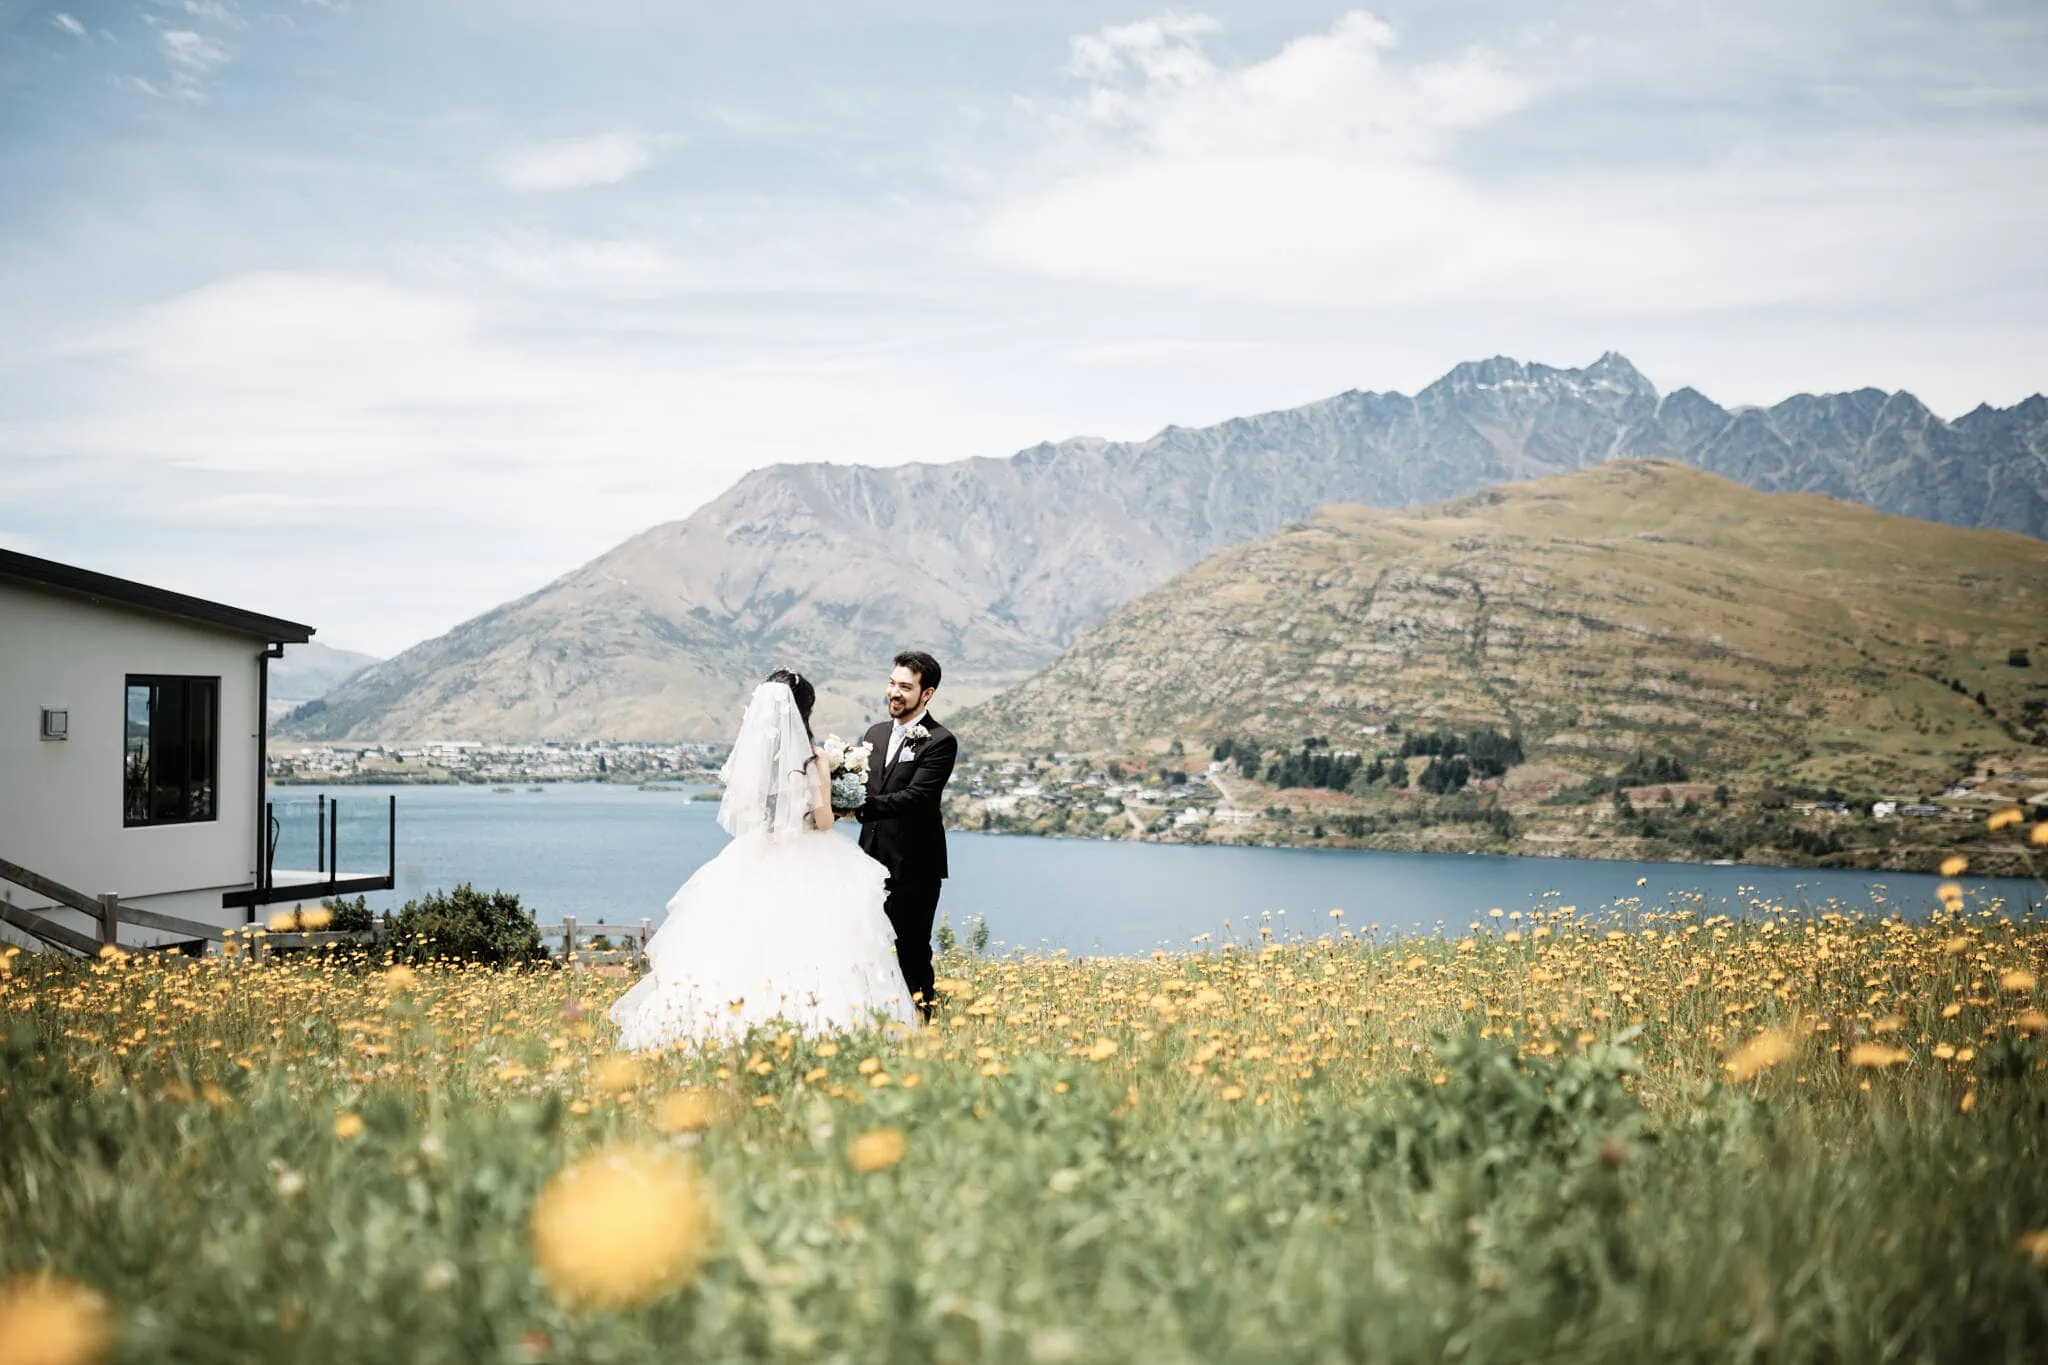 Carlos and Wanzhu's intimate heli elopement wedding, with mountains in the background.